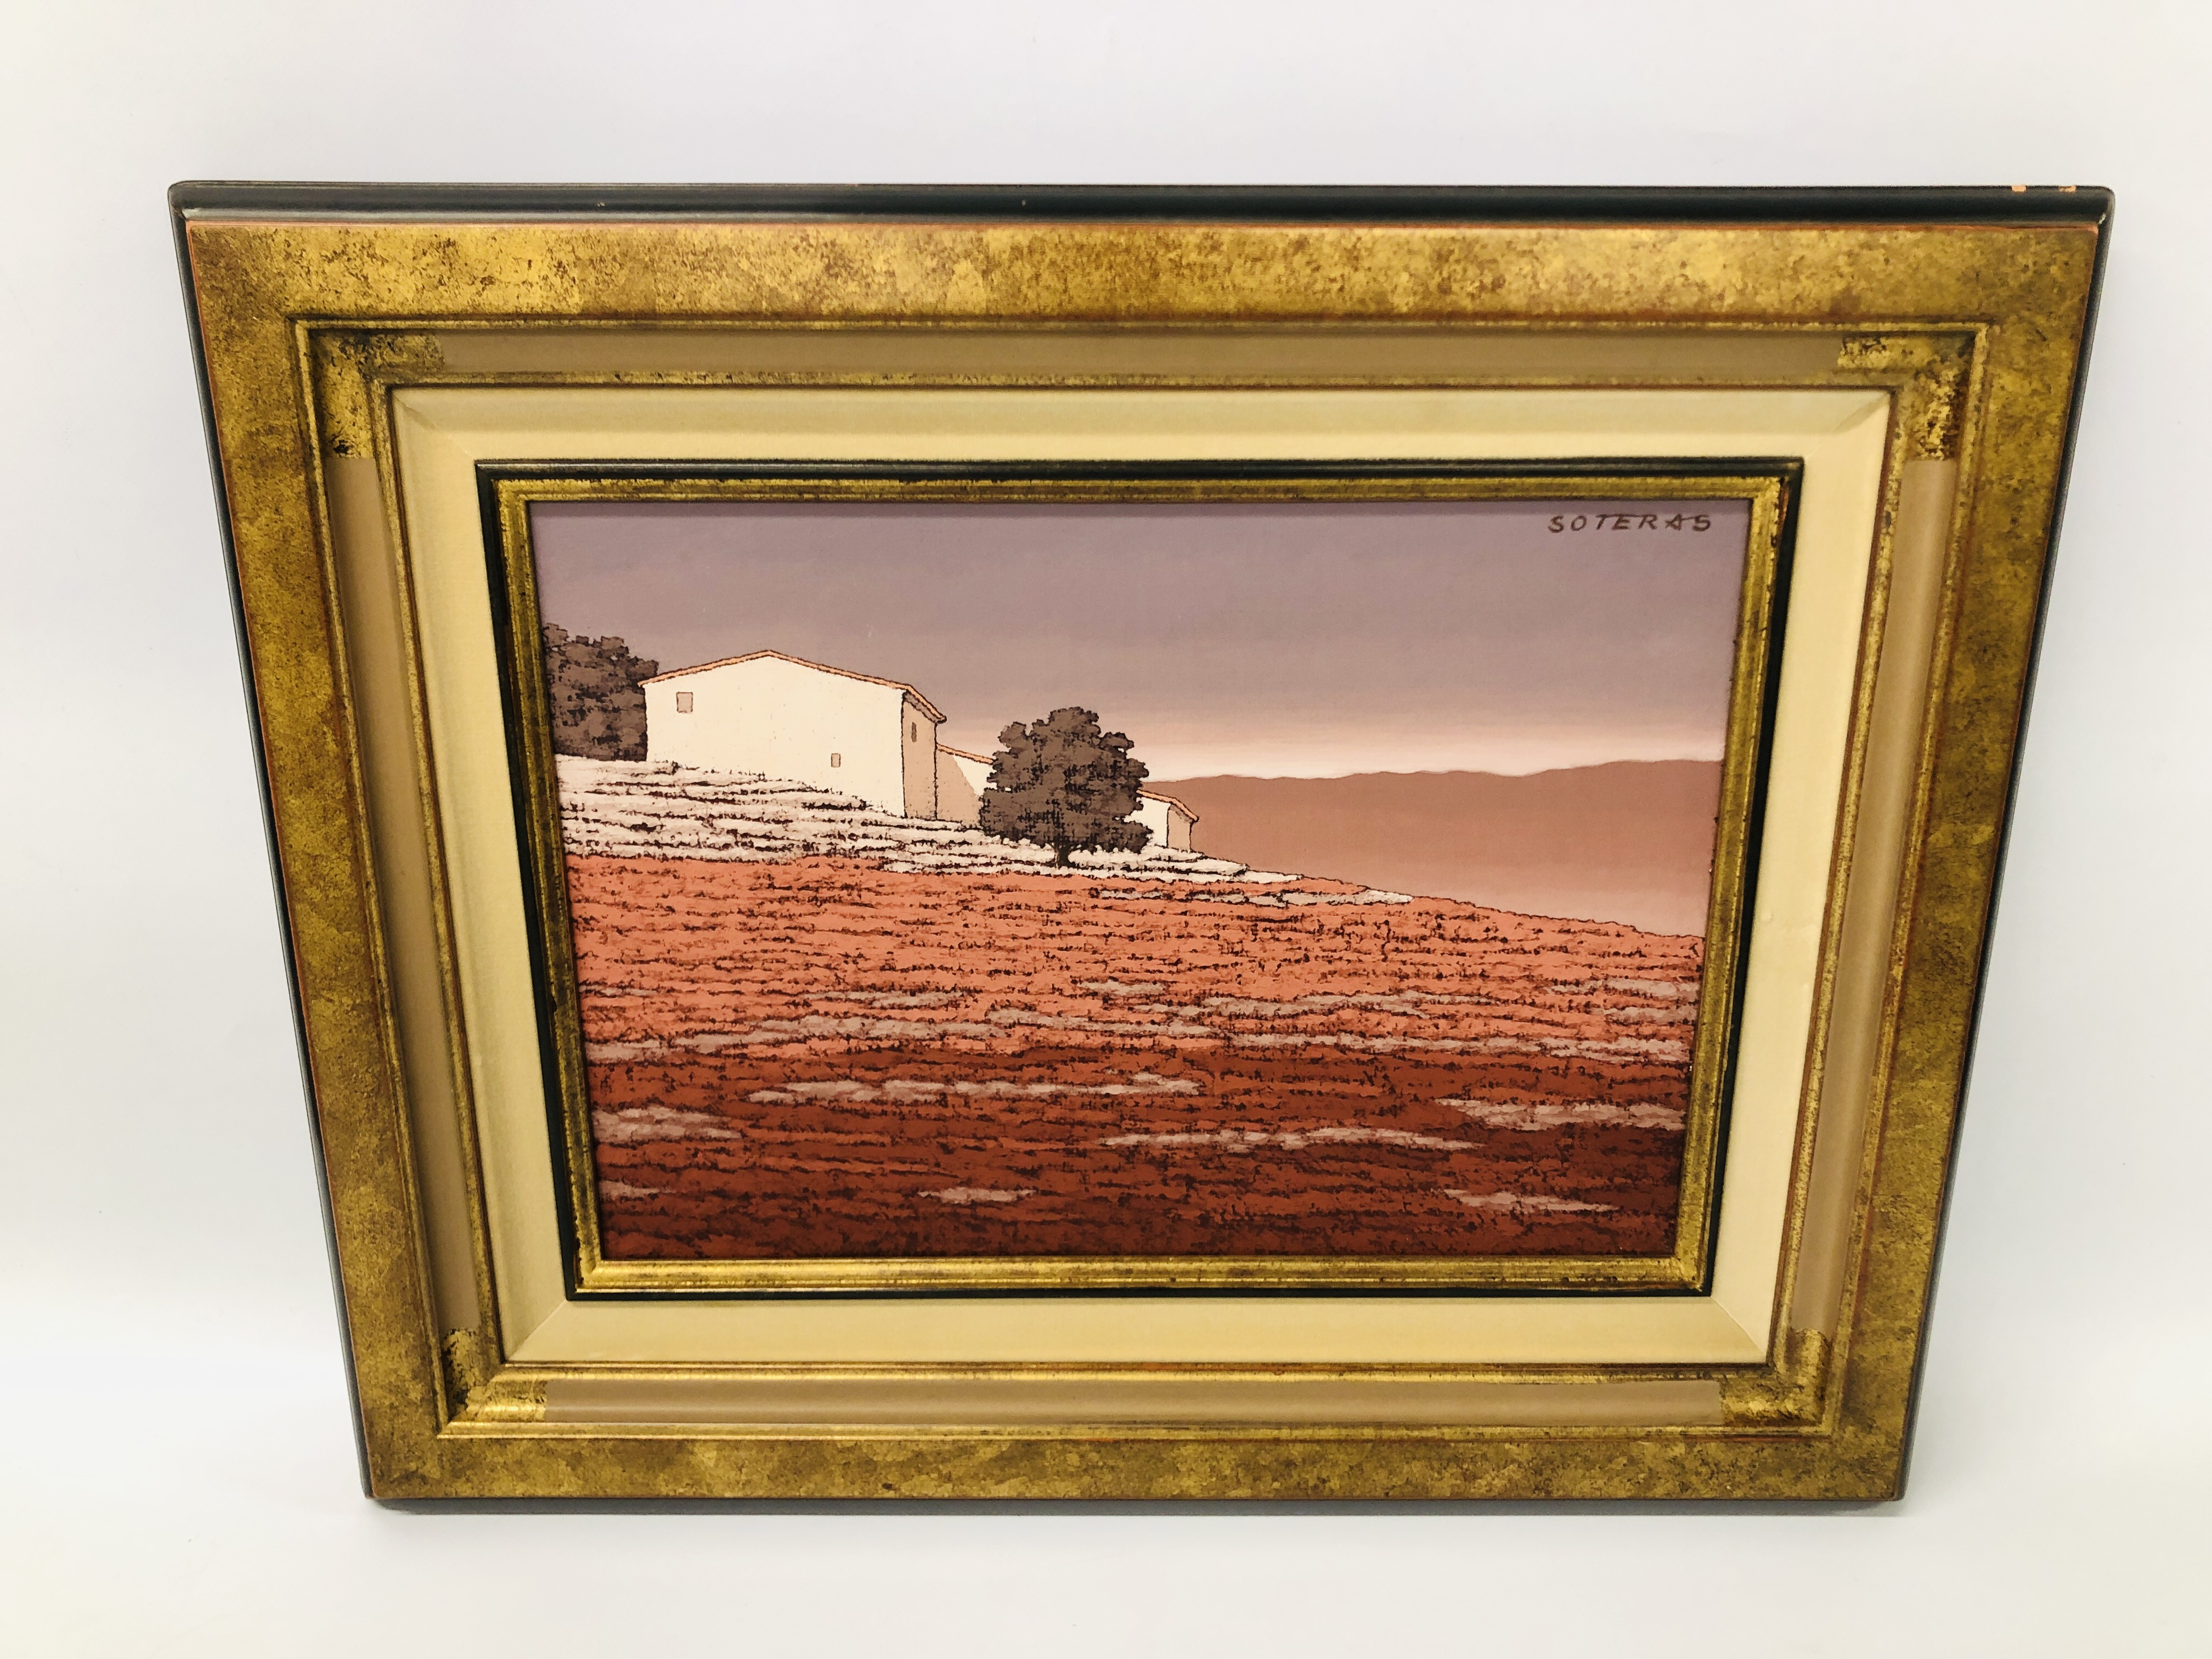 OIL ON CANVAS SPANISH HOUSE ON A HILL FRAMED AND MOUNTED BEARING SIGNATURE JORGE SORTERAS 44.